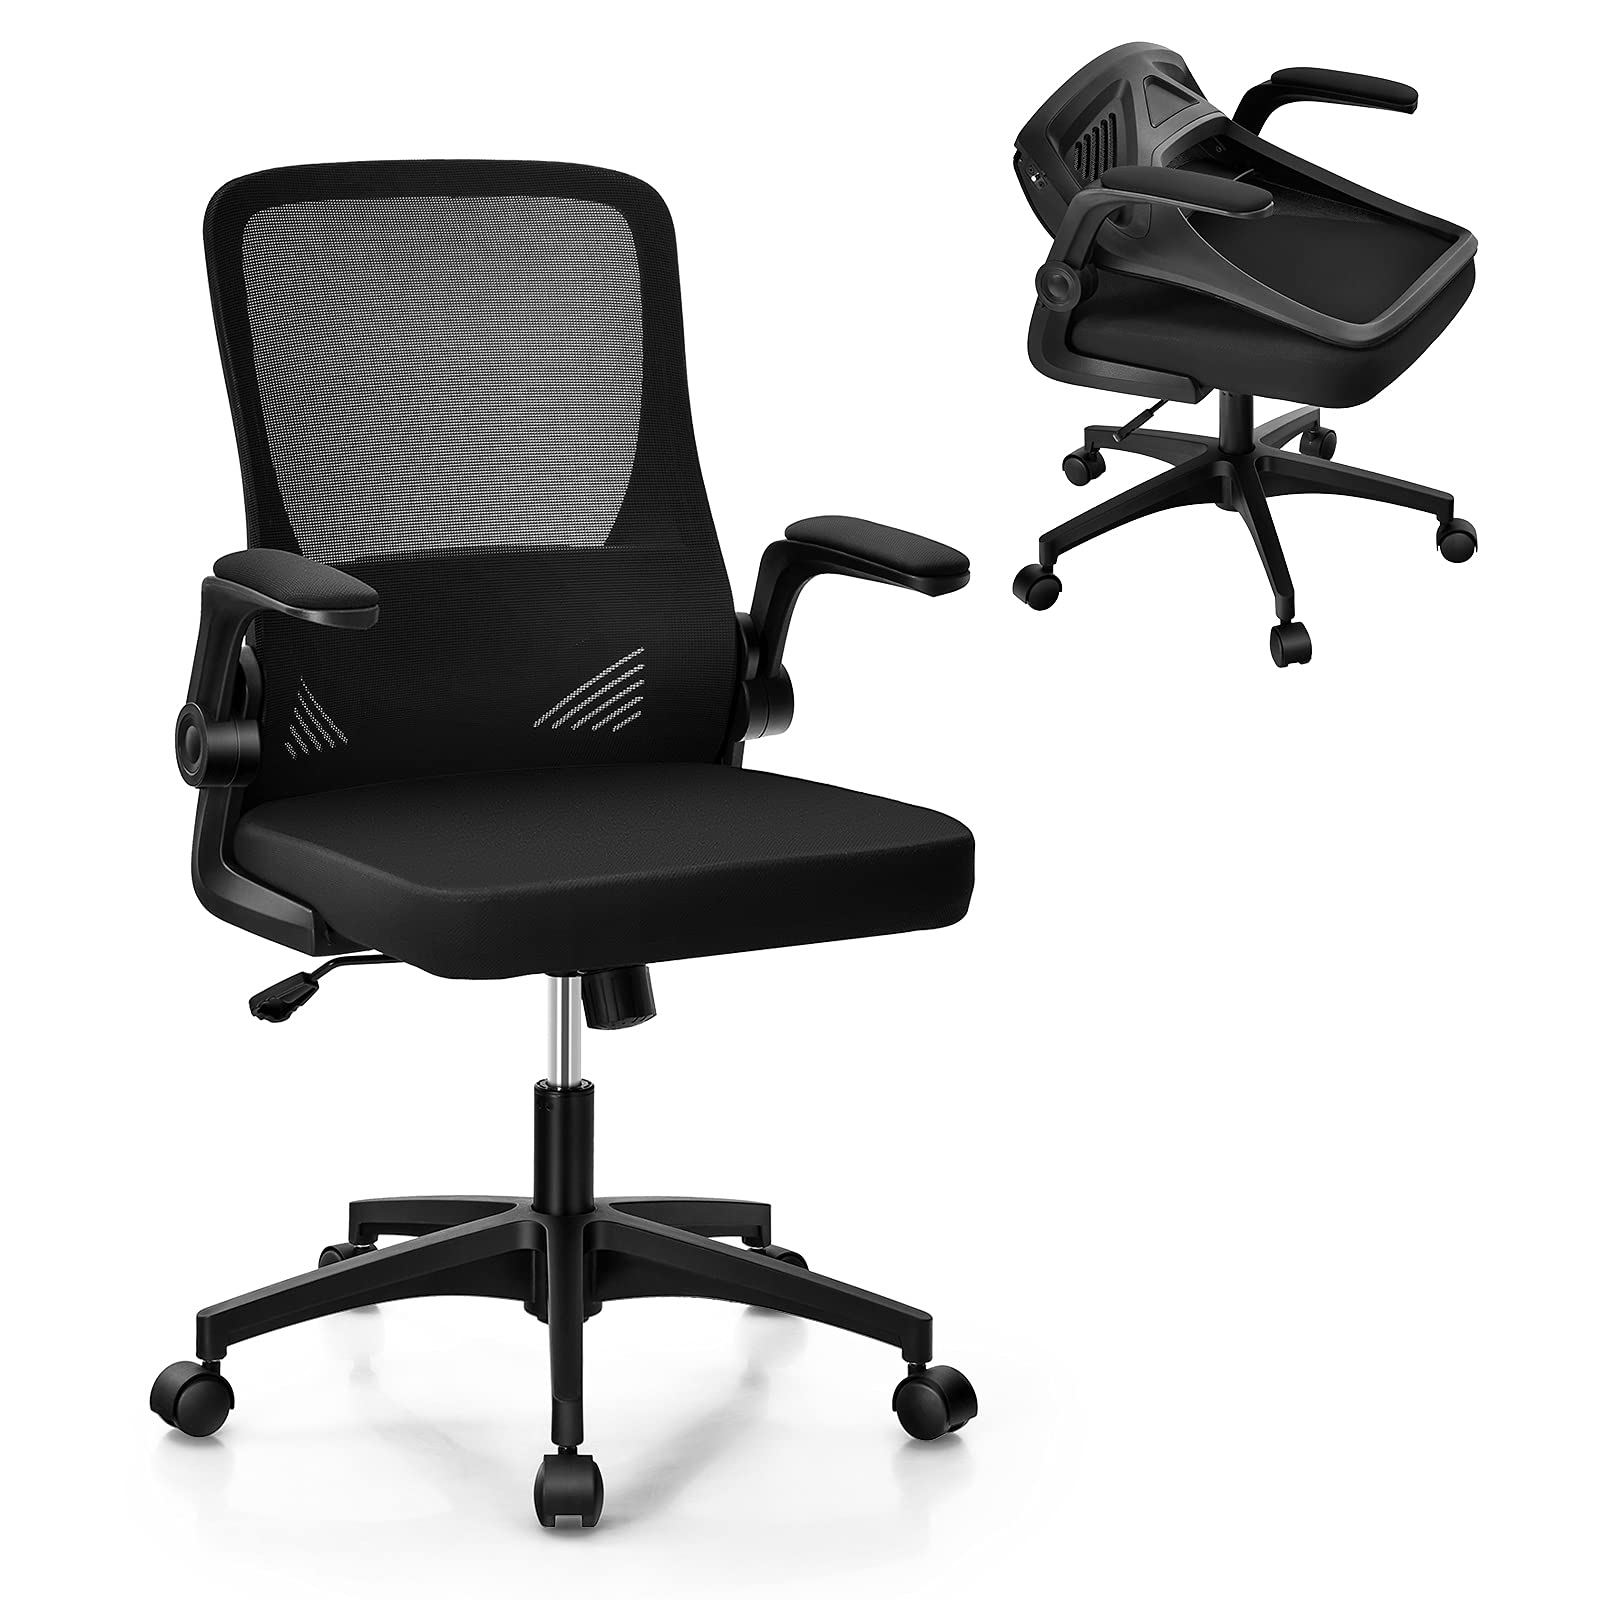 Giantex Swivel Rolling Executive Task Chair Computer Desk Chair for Home Meeting Room (Black)